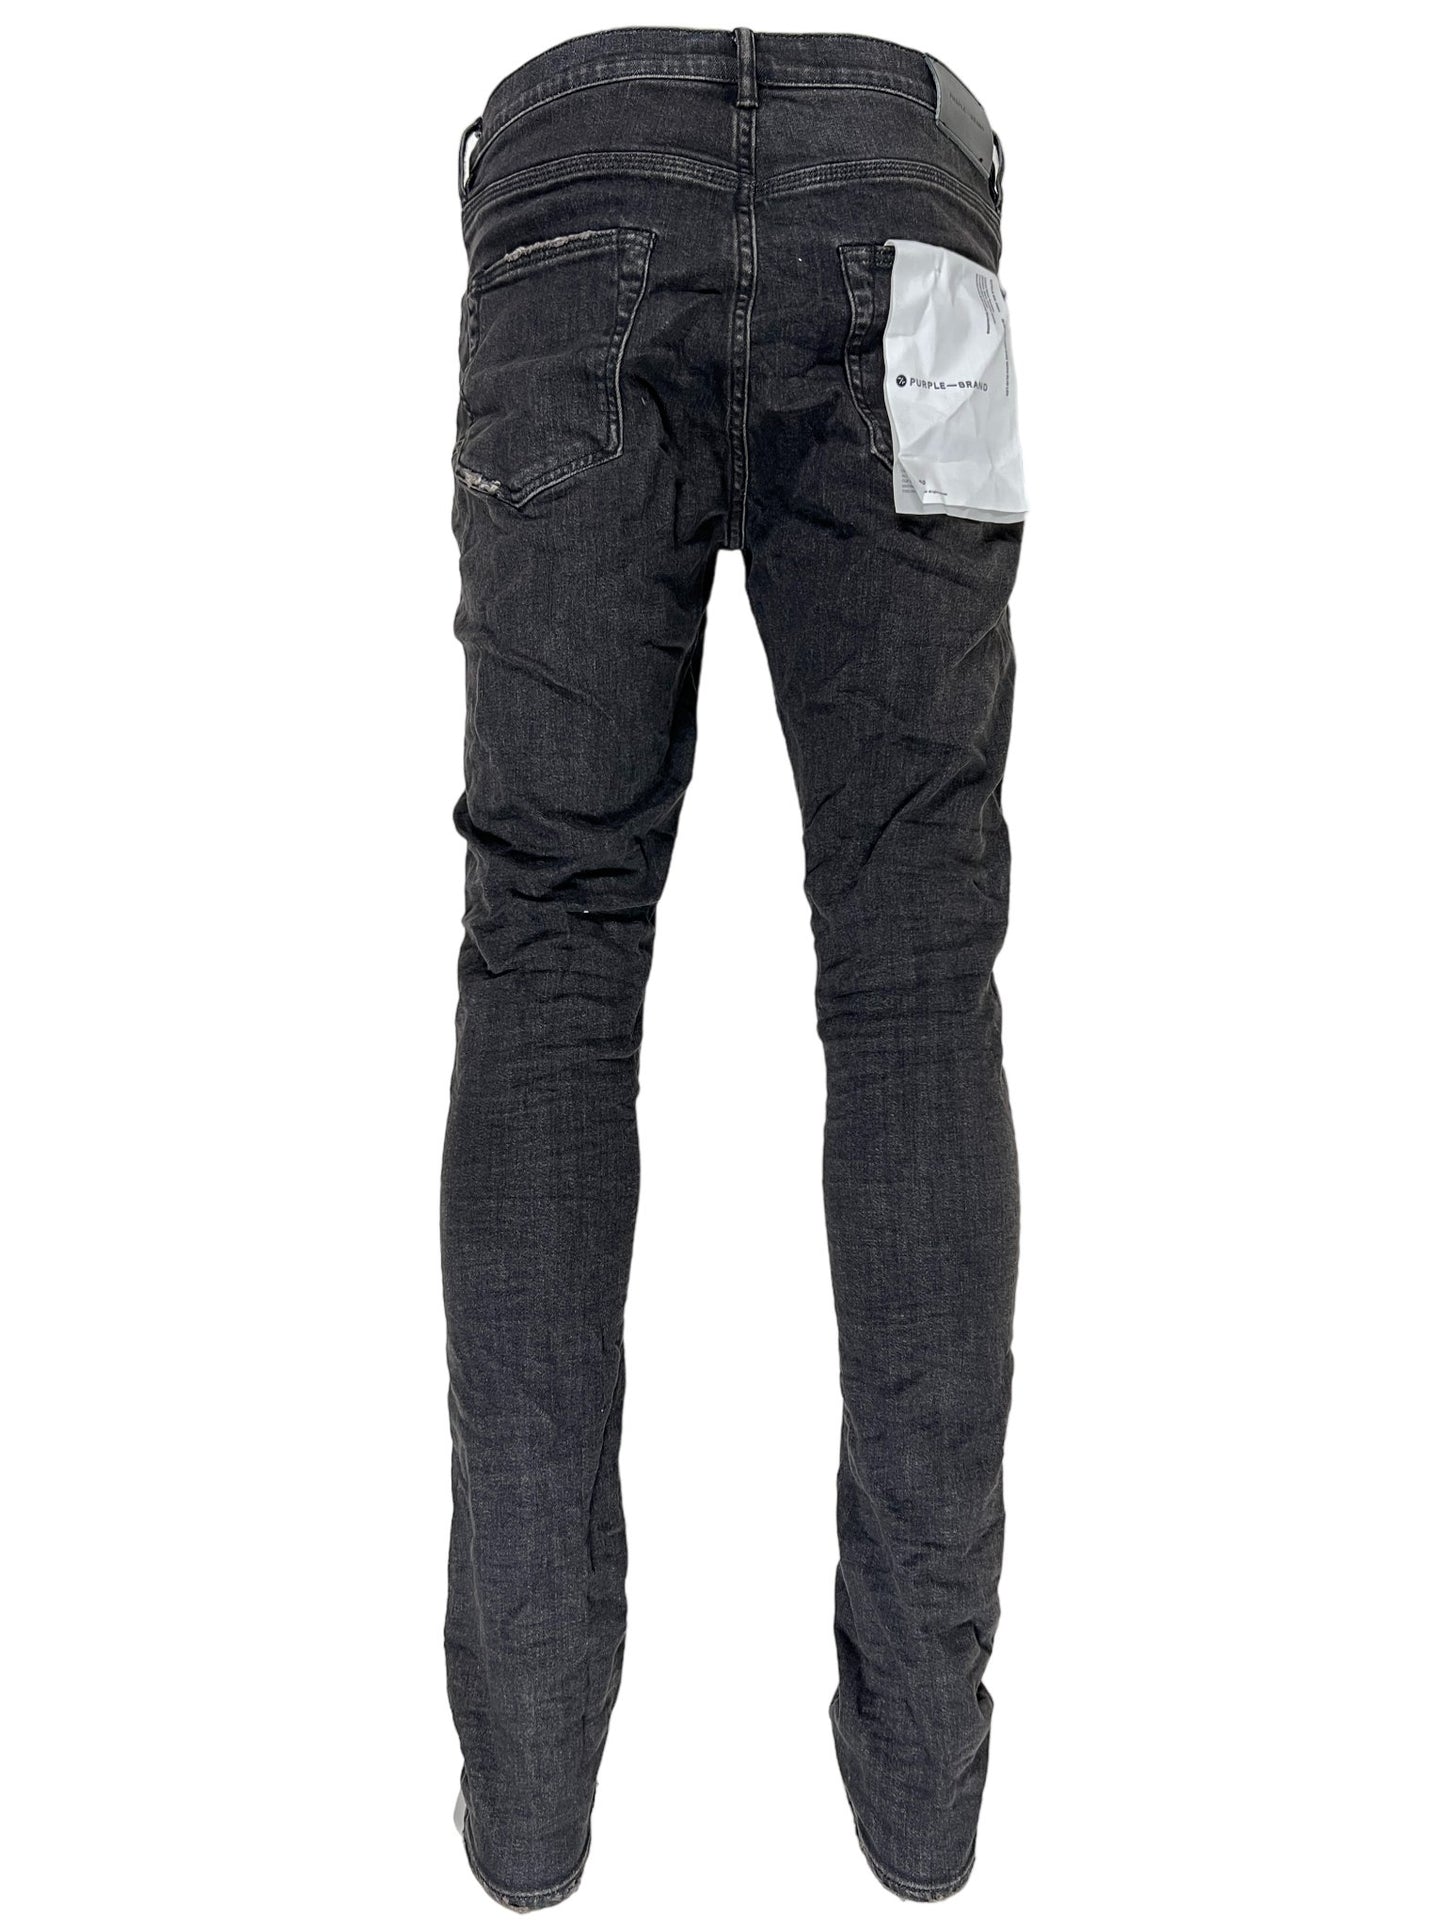 A pair of PURPLE BRAND Jeans P001-BOS black over spray core with a pocket on the back.